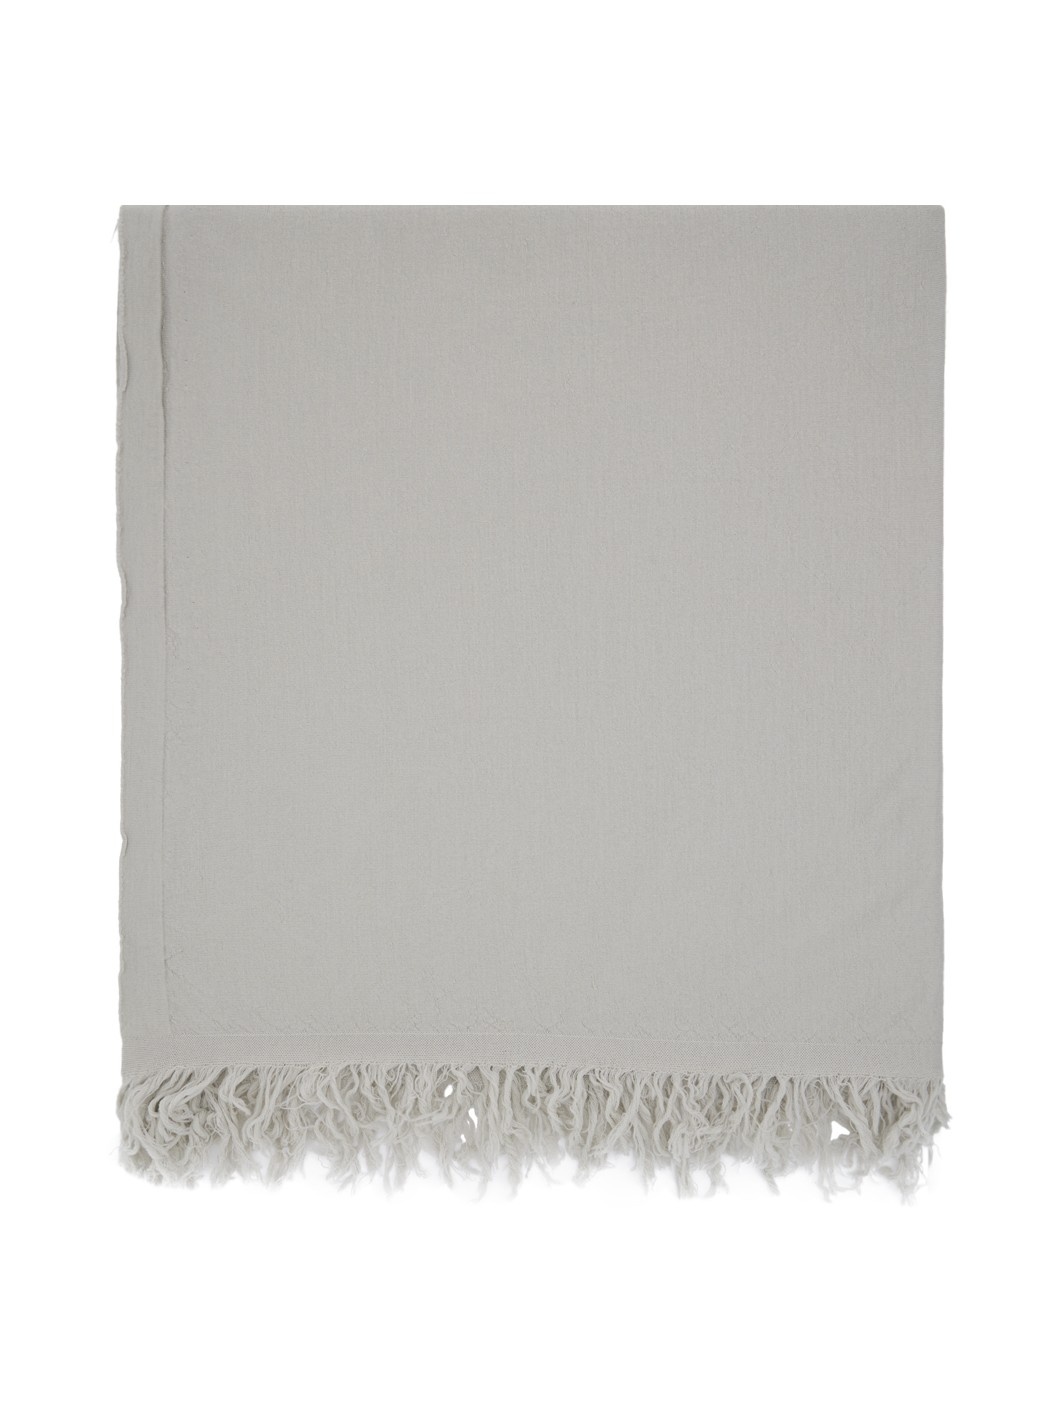 Off-White Knit Blanket Scarf - 2